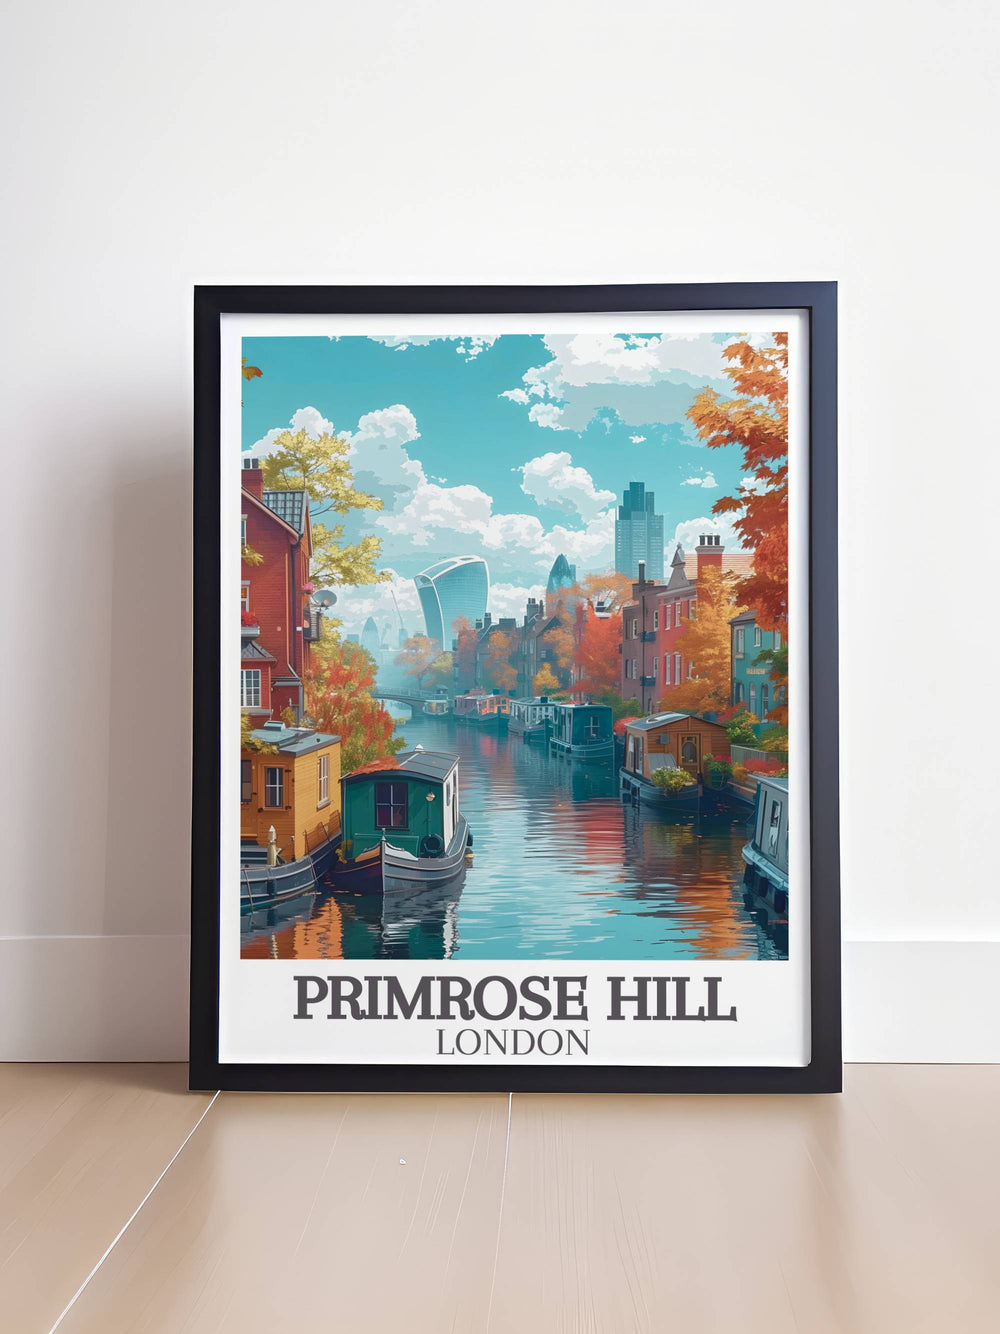 Experience the charm of Primrose Hill with our Prints collection, showcasing stunning views and peaceful landscapes.